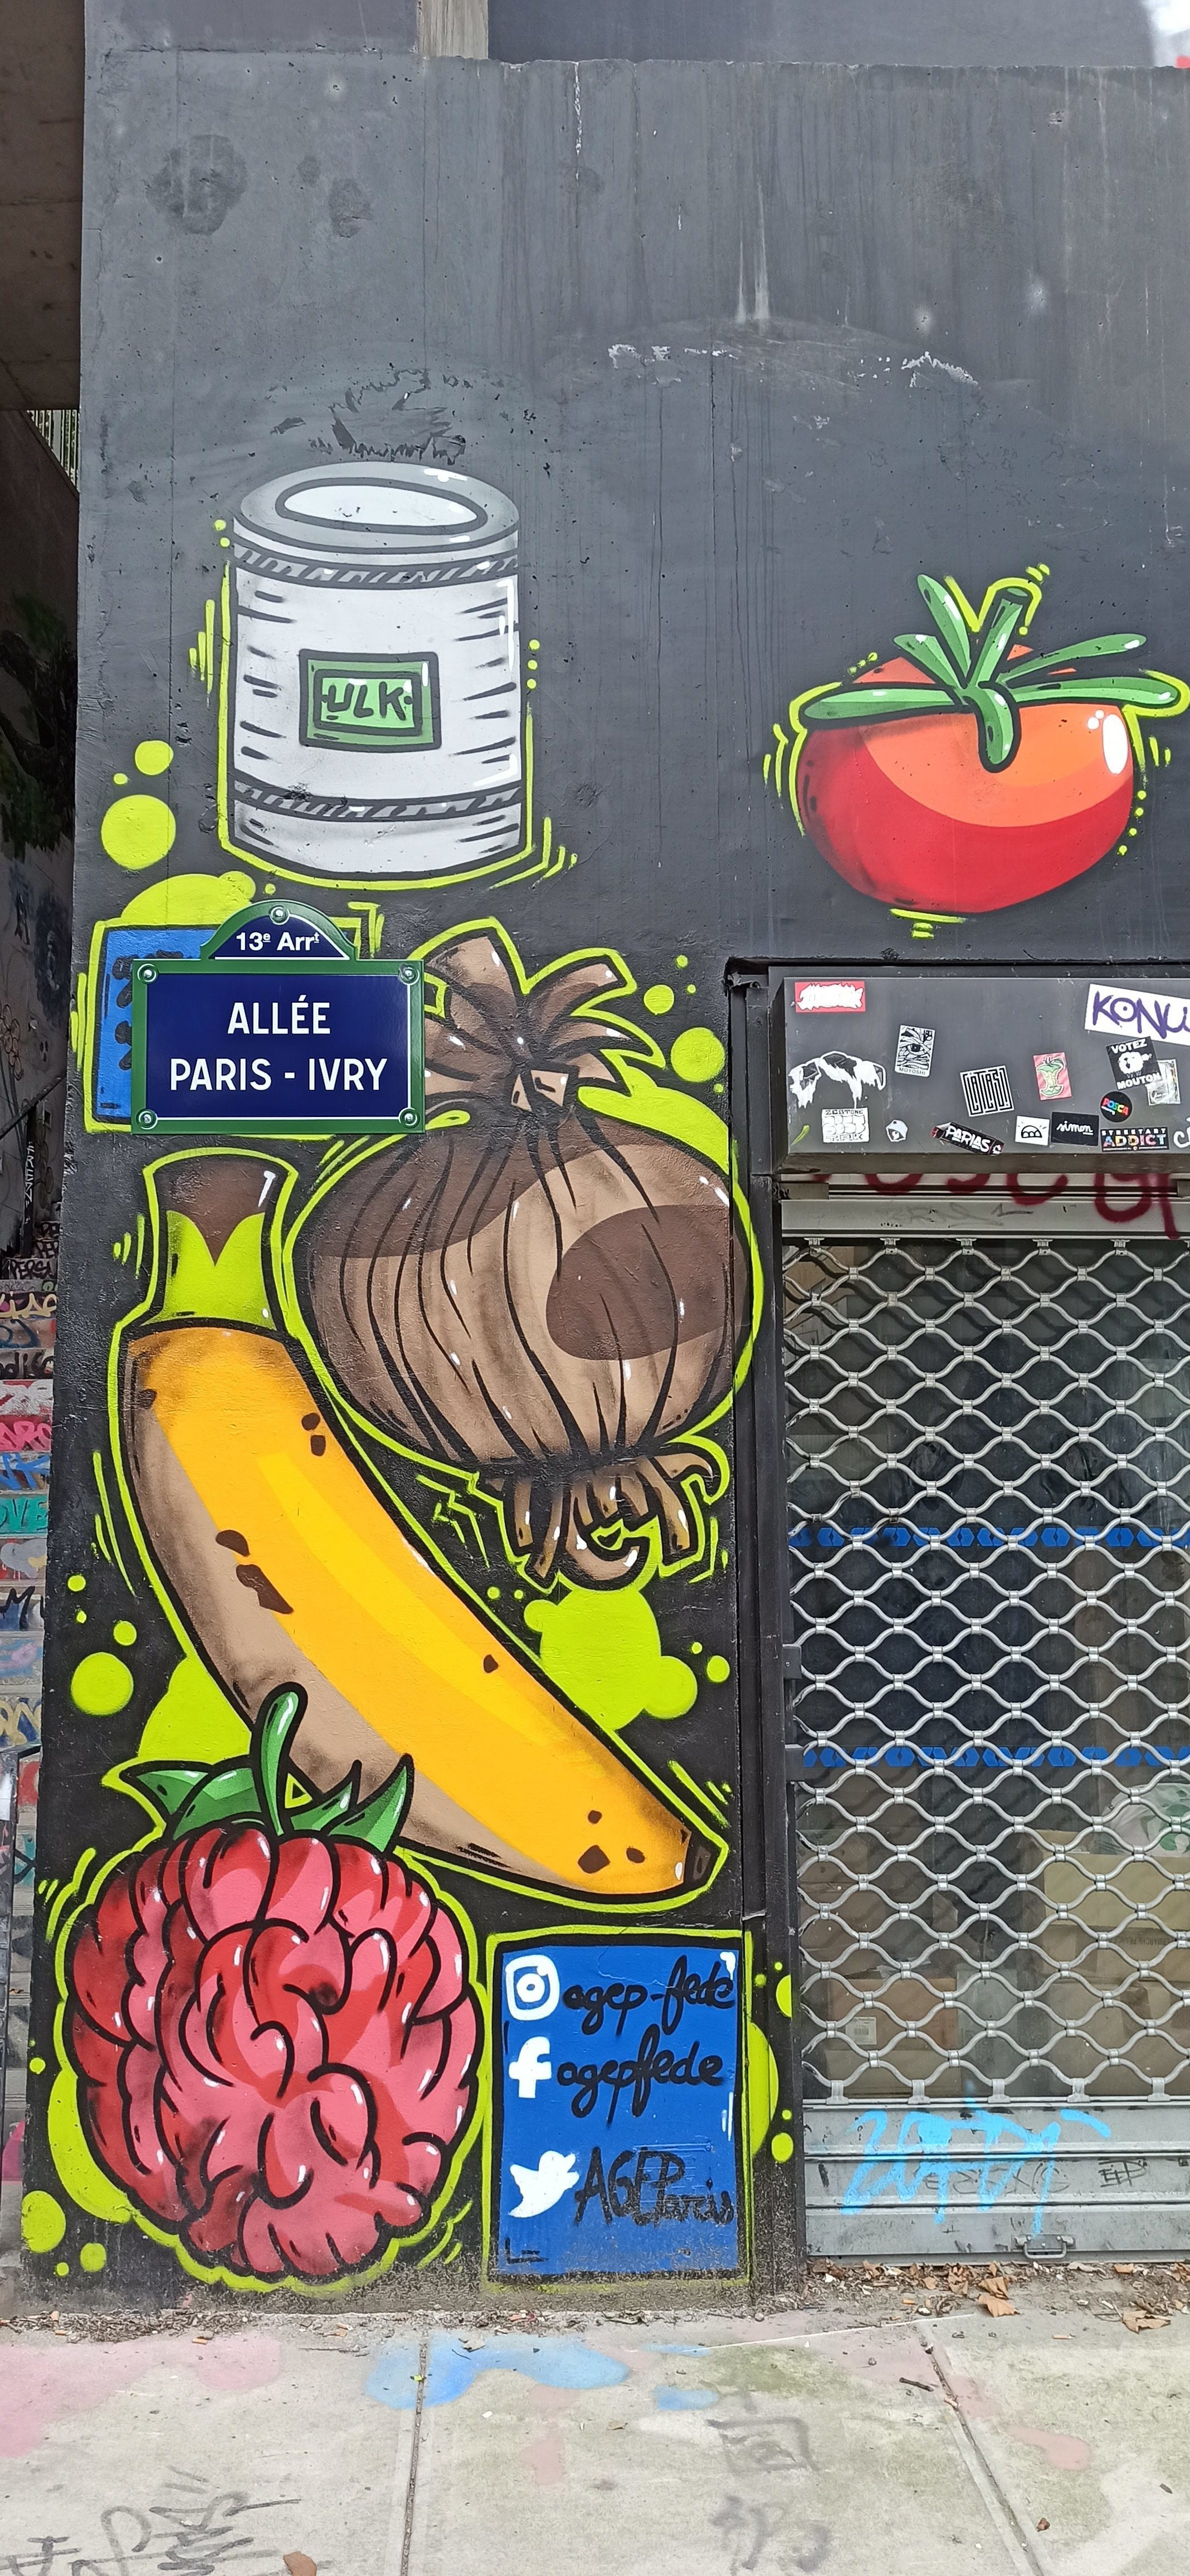 Graffiti 5488  captured by Rabot in Paris France